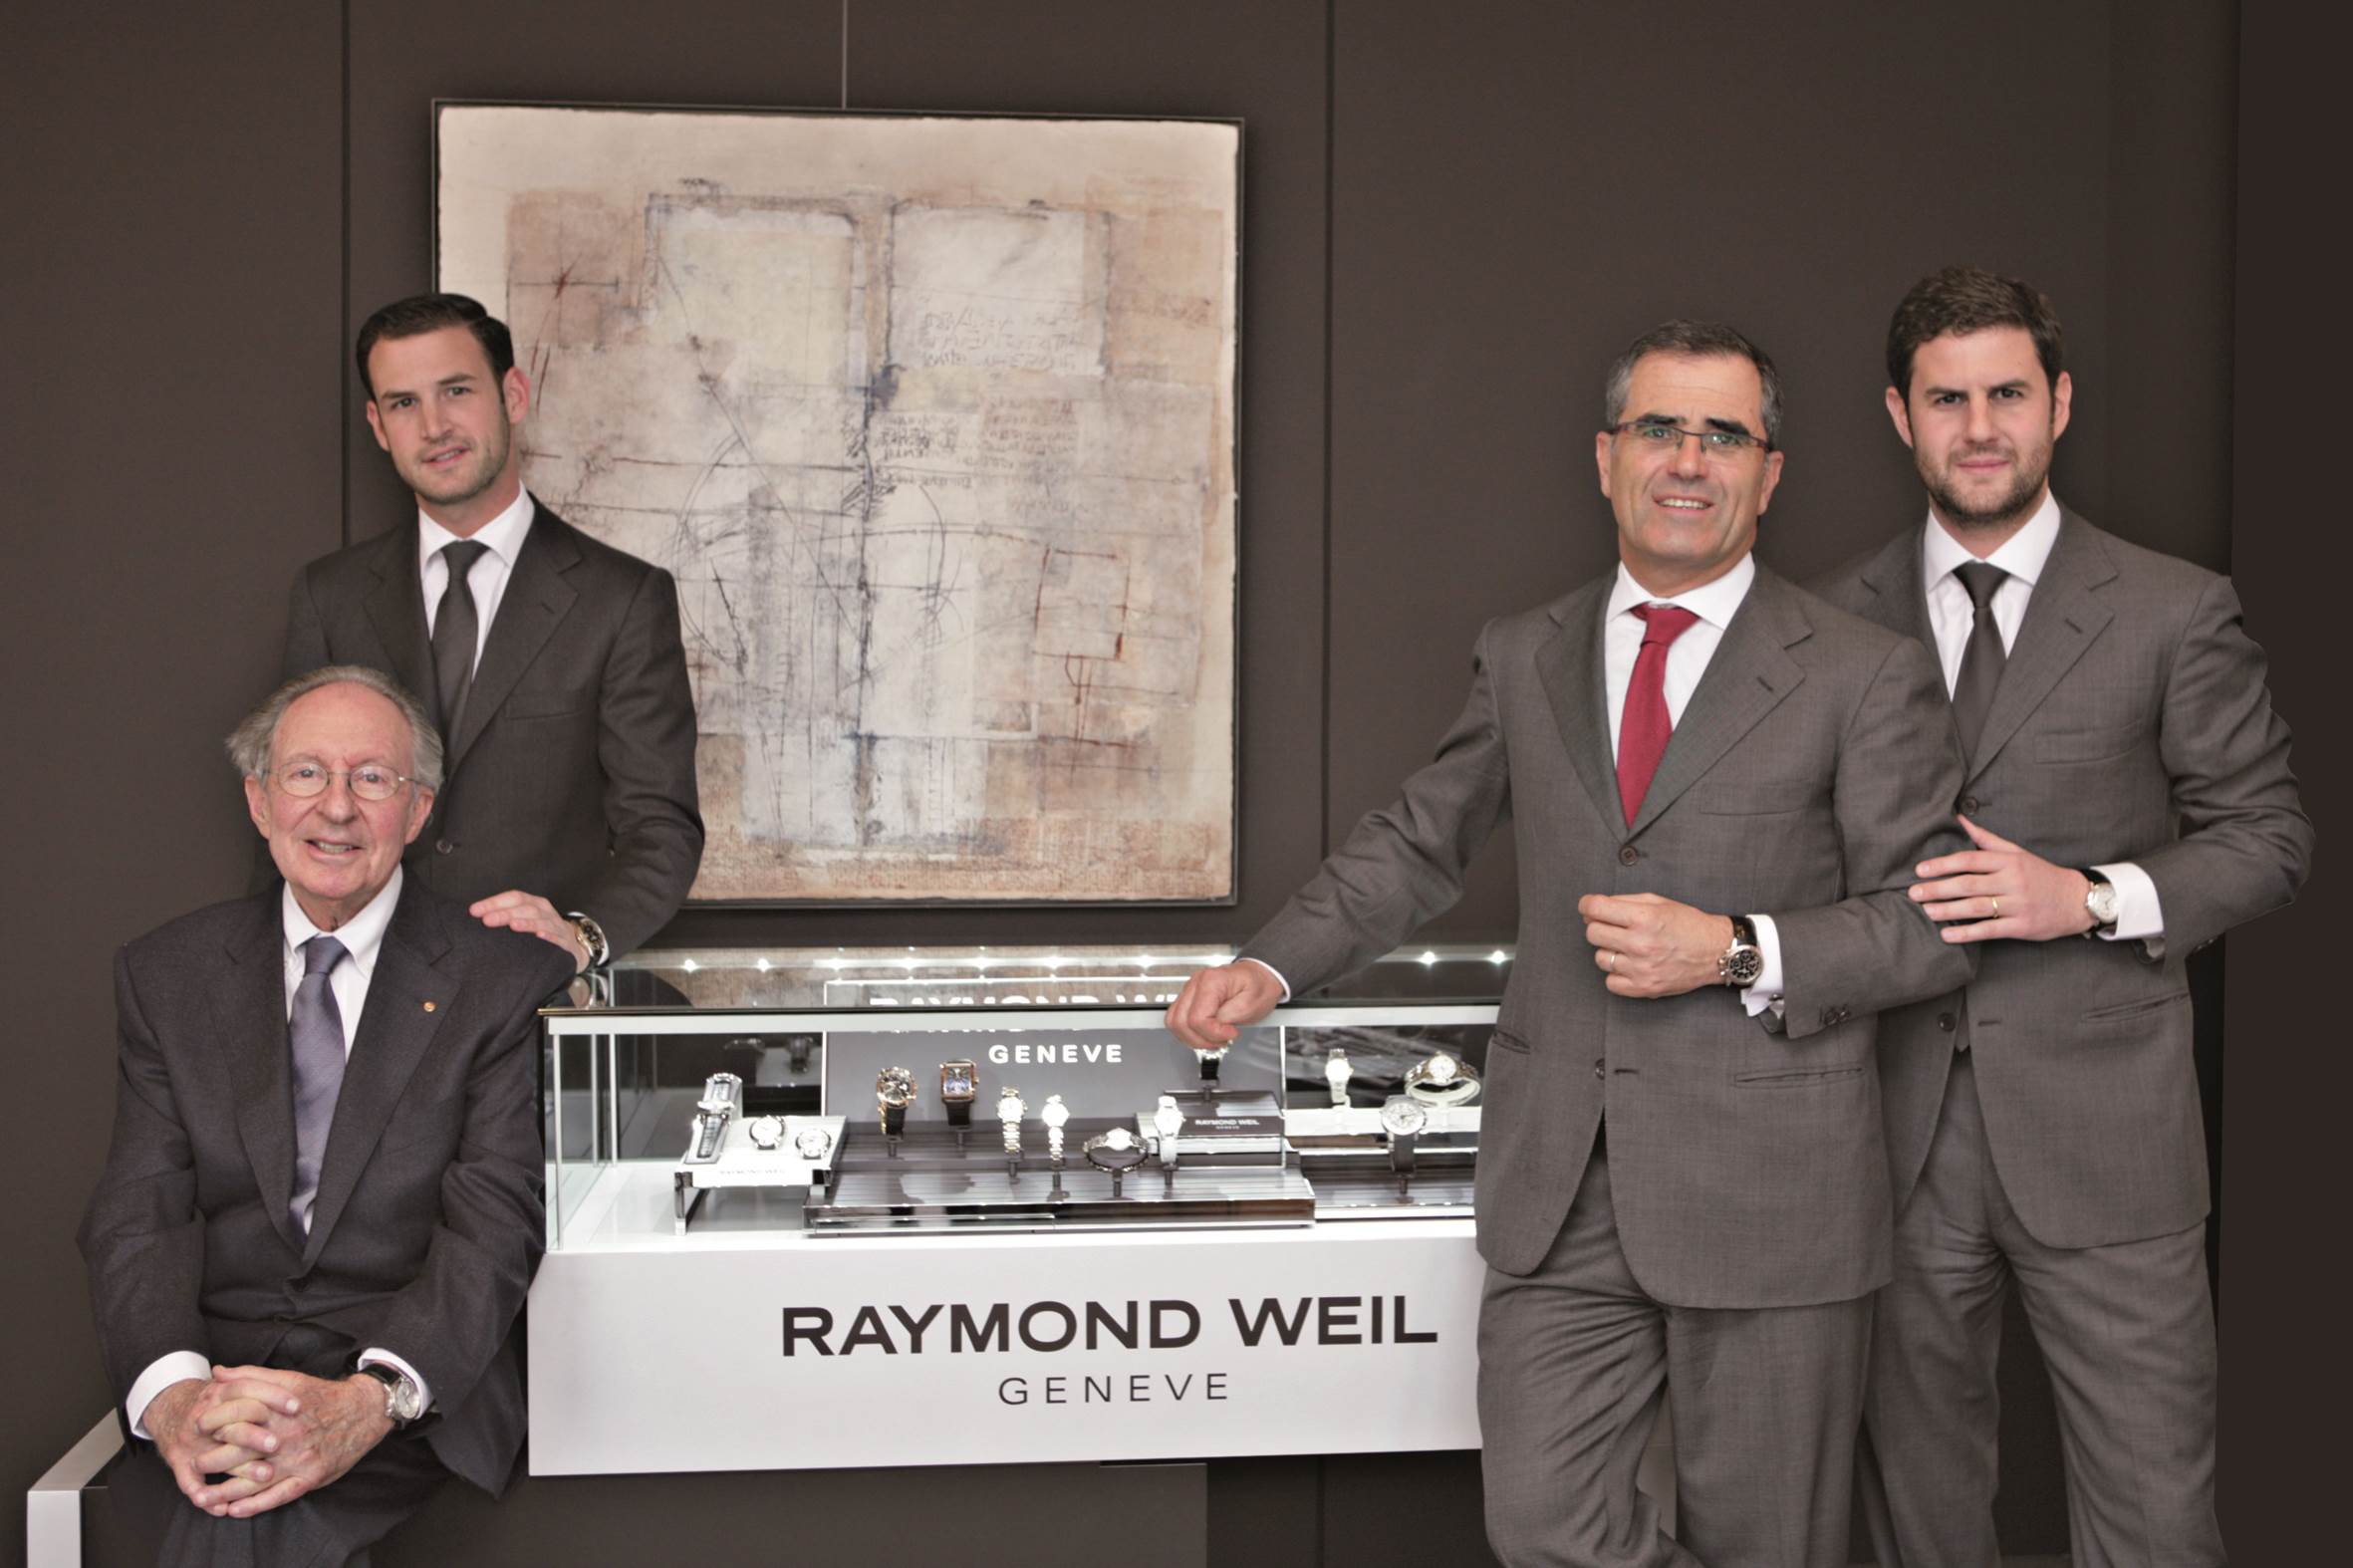 The history Raymond Weil and our longstanding relationship